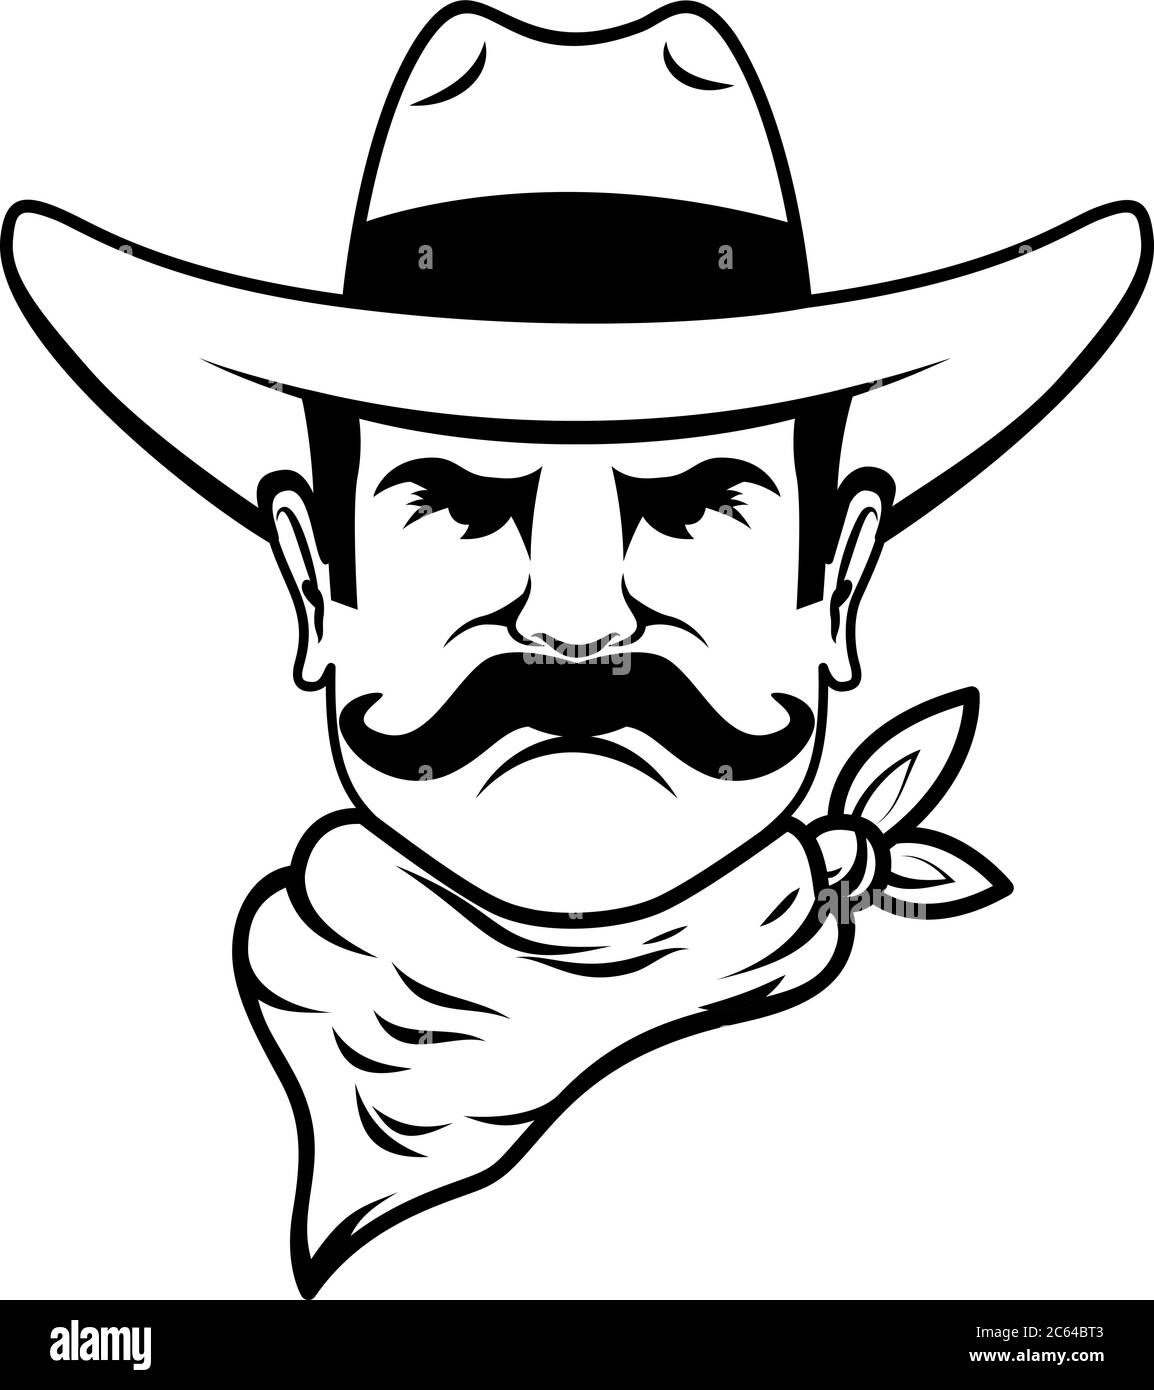 Icon of cowboy head. Design element for logo, label, sign, poster, t shirt. Vector illustration Stock Vector